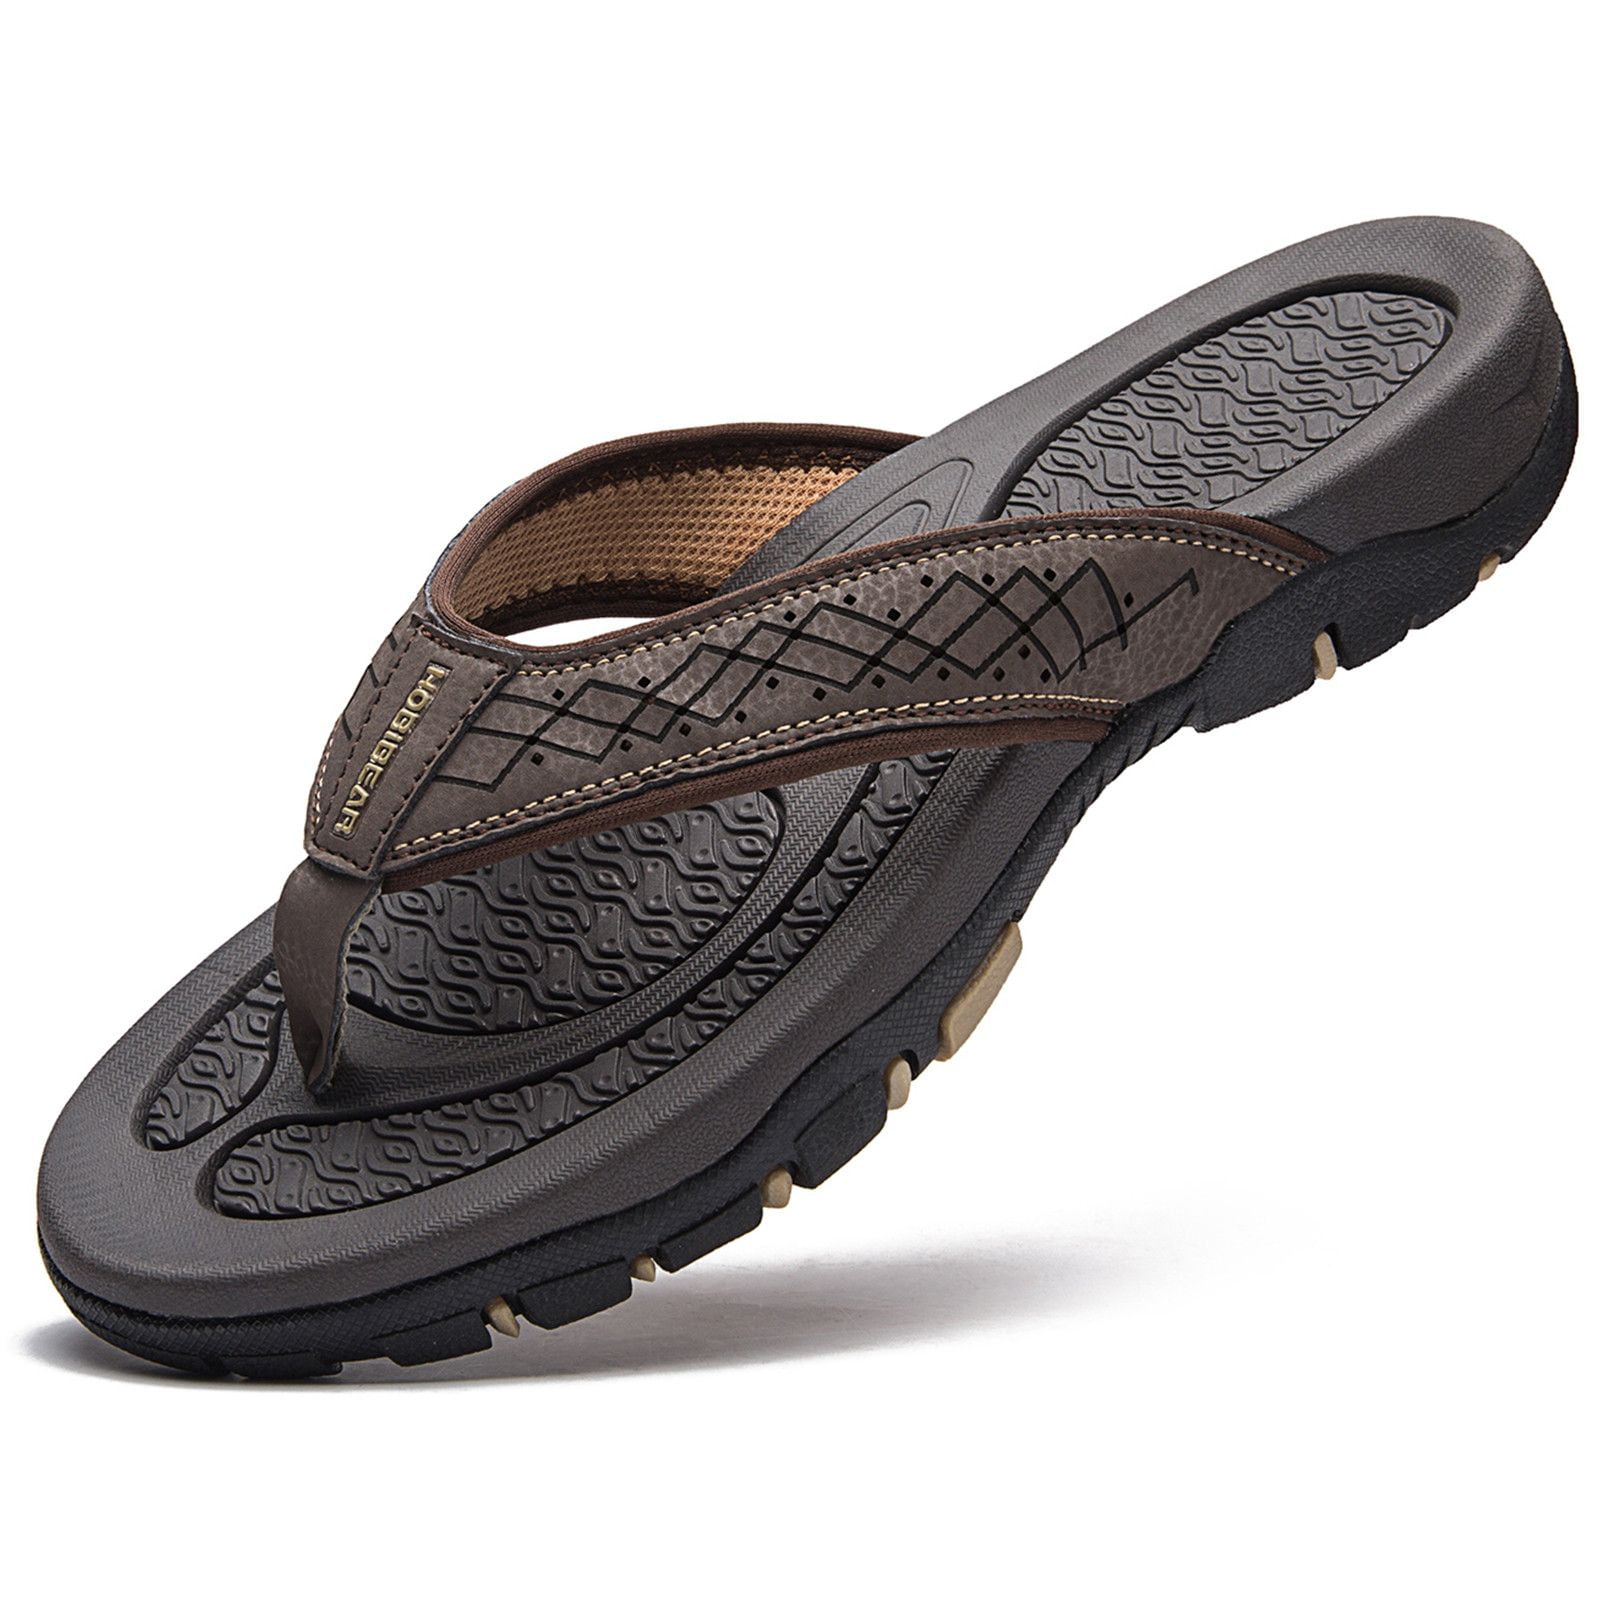 Forthery Summer Casual Non-Slip Mens Flip-Flops Comfortable Wear-Resistant Sandals and Flip-Flops Beach Shoes 